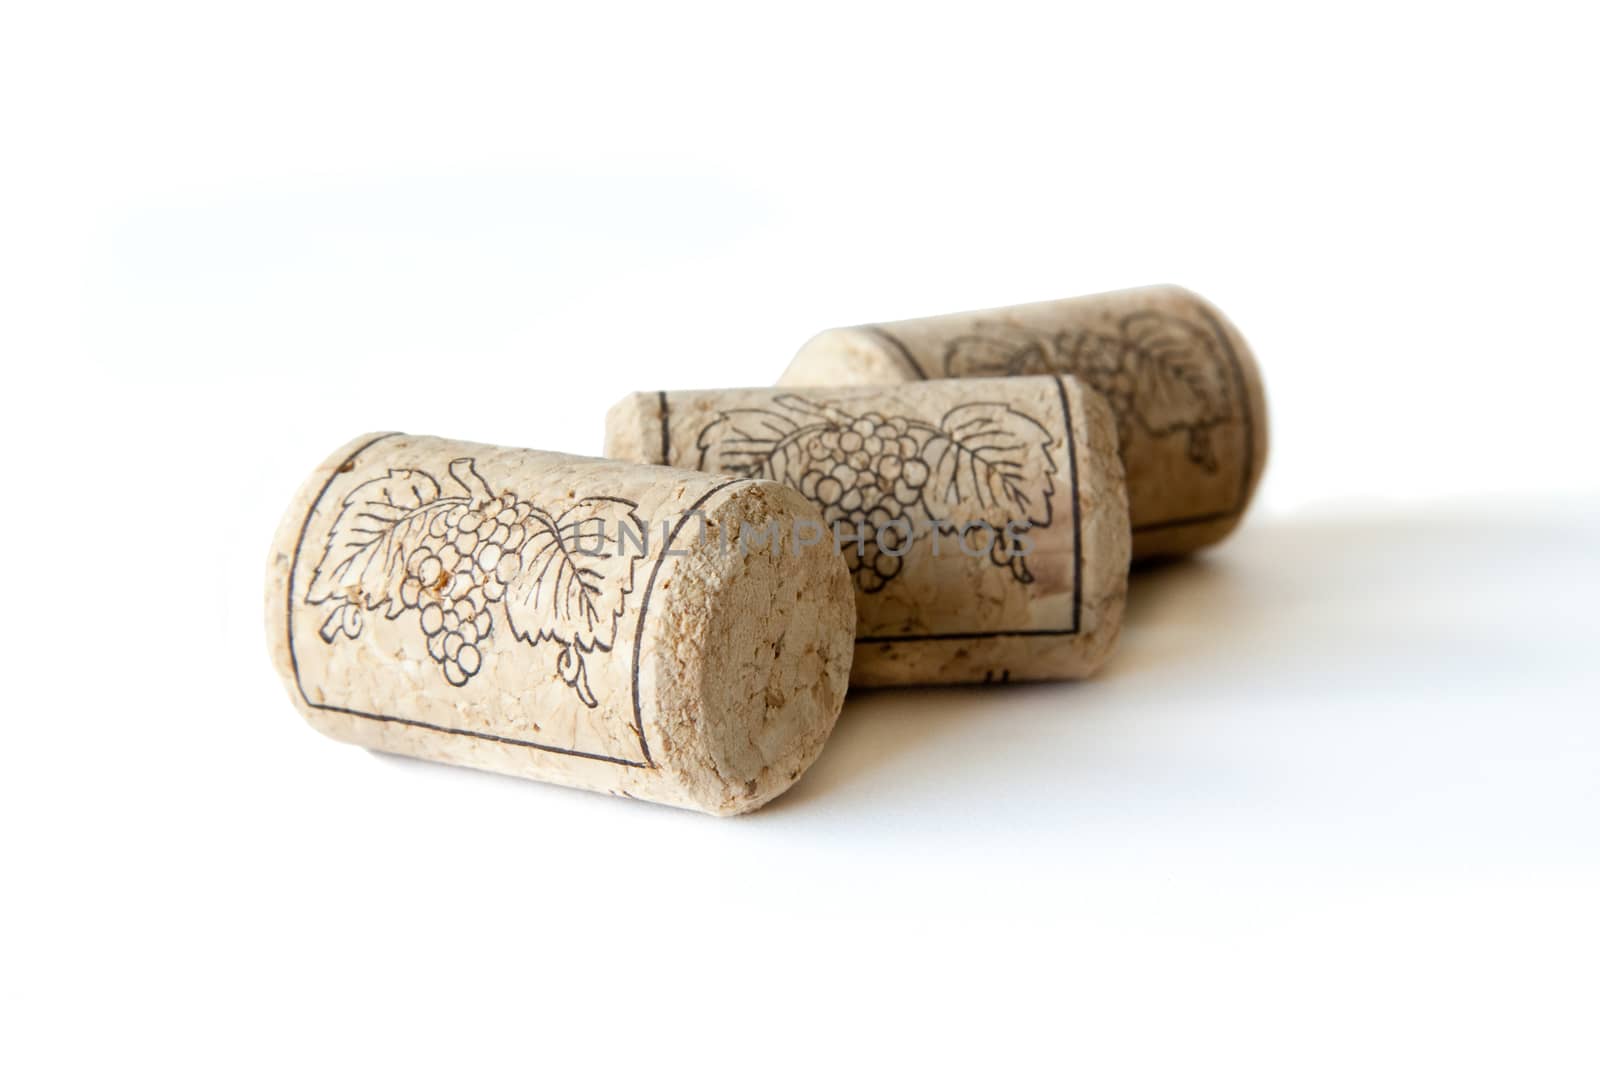 Wine corks on a white background